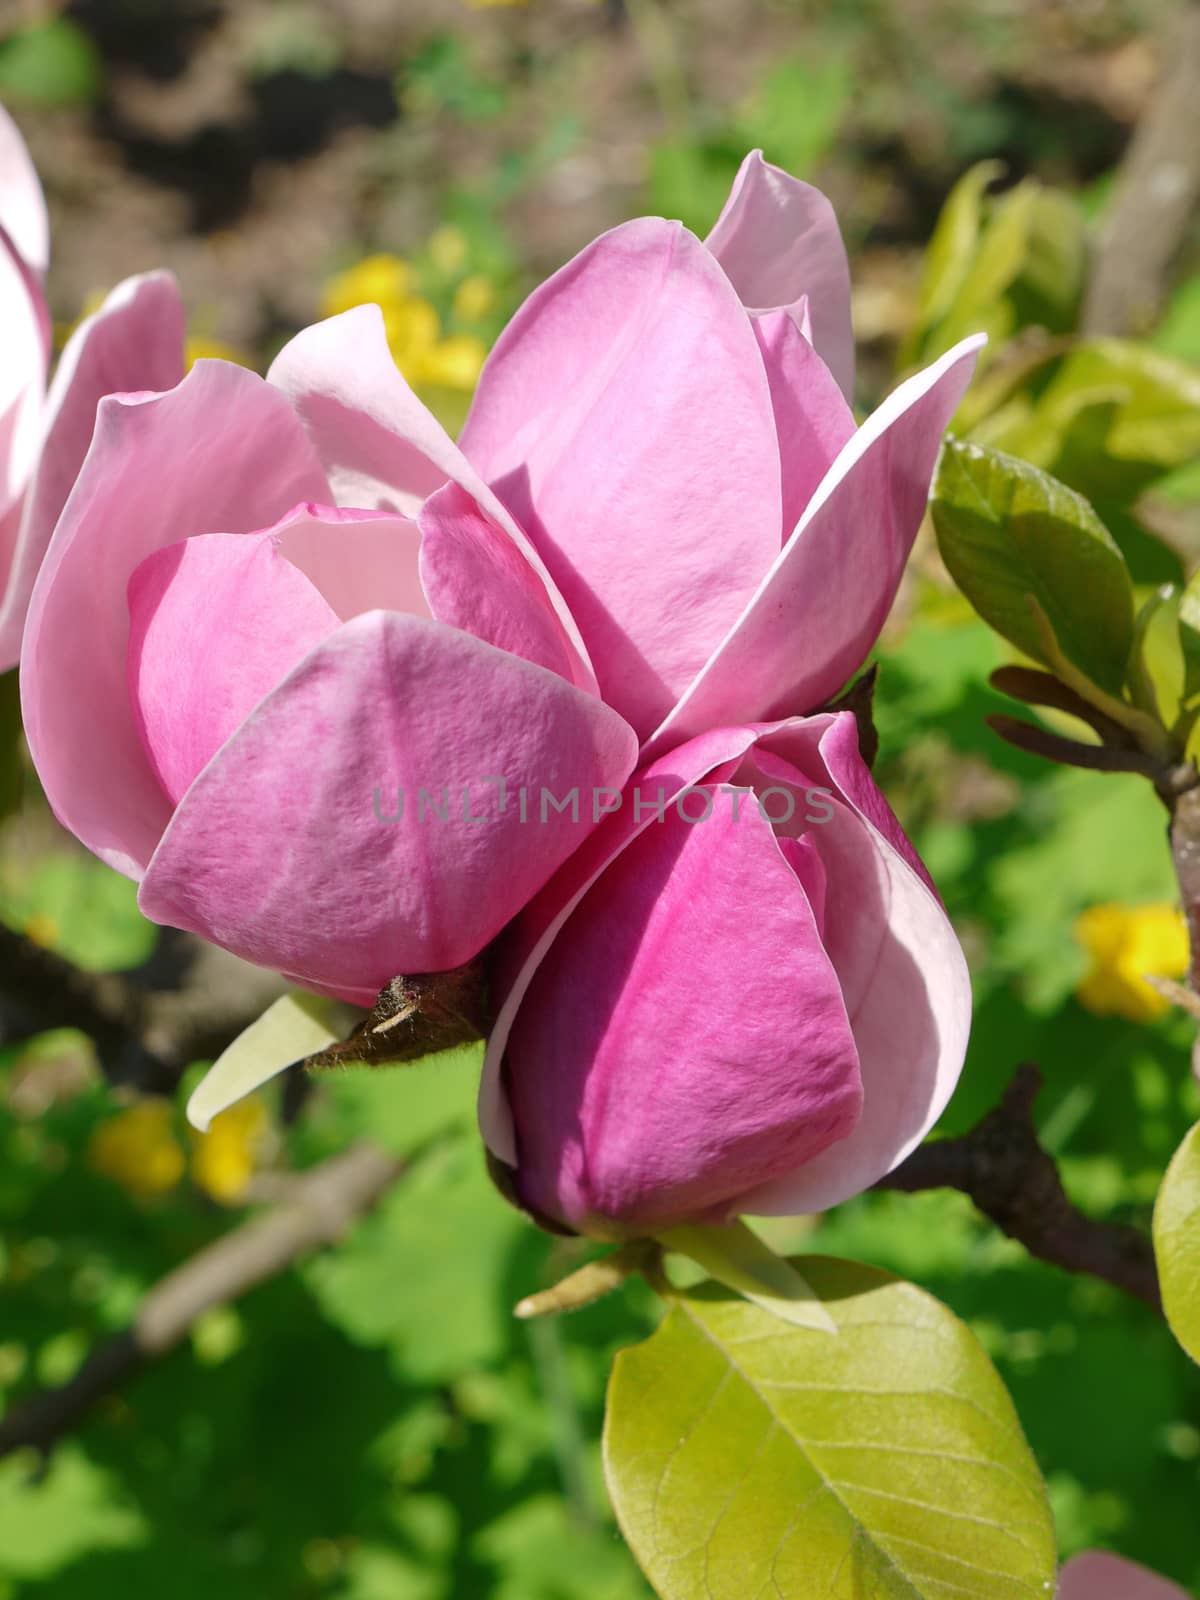 tender buds of budding rose petals on a bright sunny day by Adamchuk